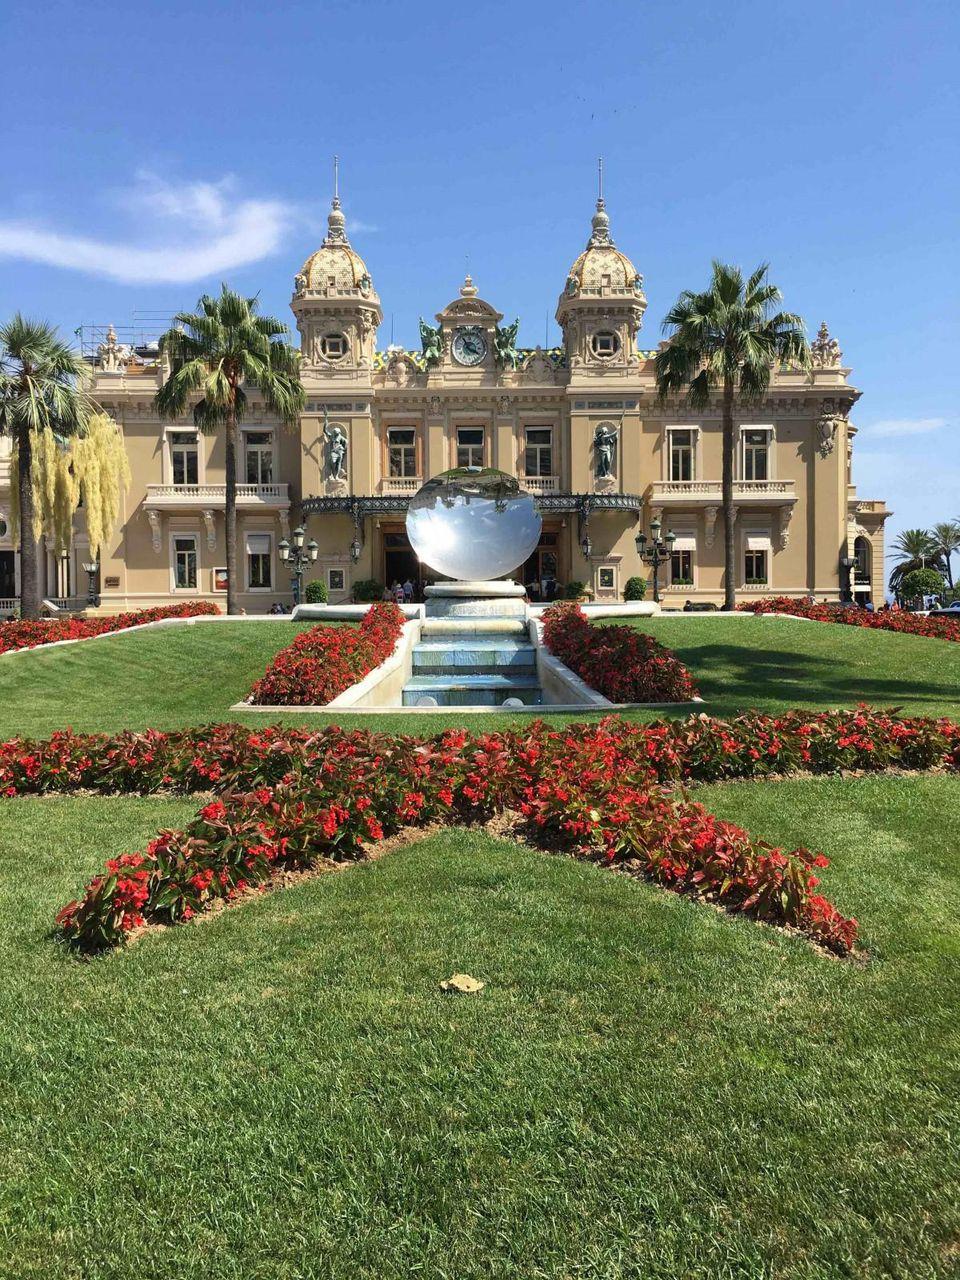 How to Spend 48 Hours in Monte Carlo Like the Rich and Famous